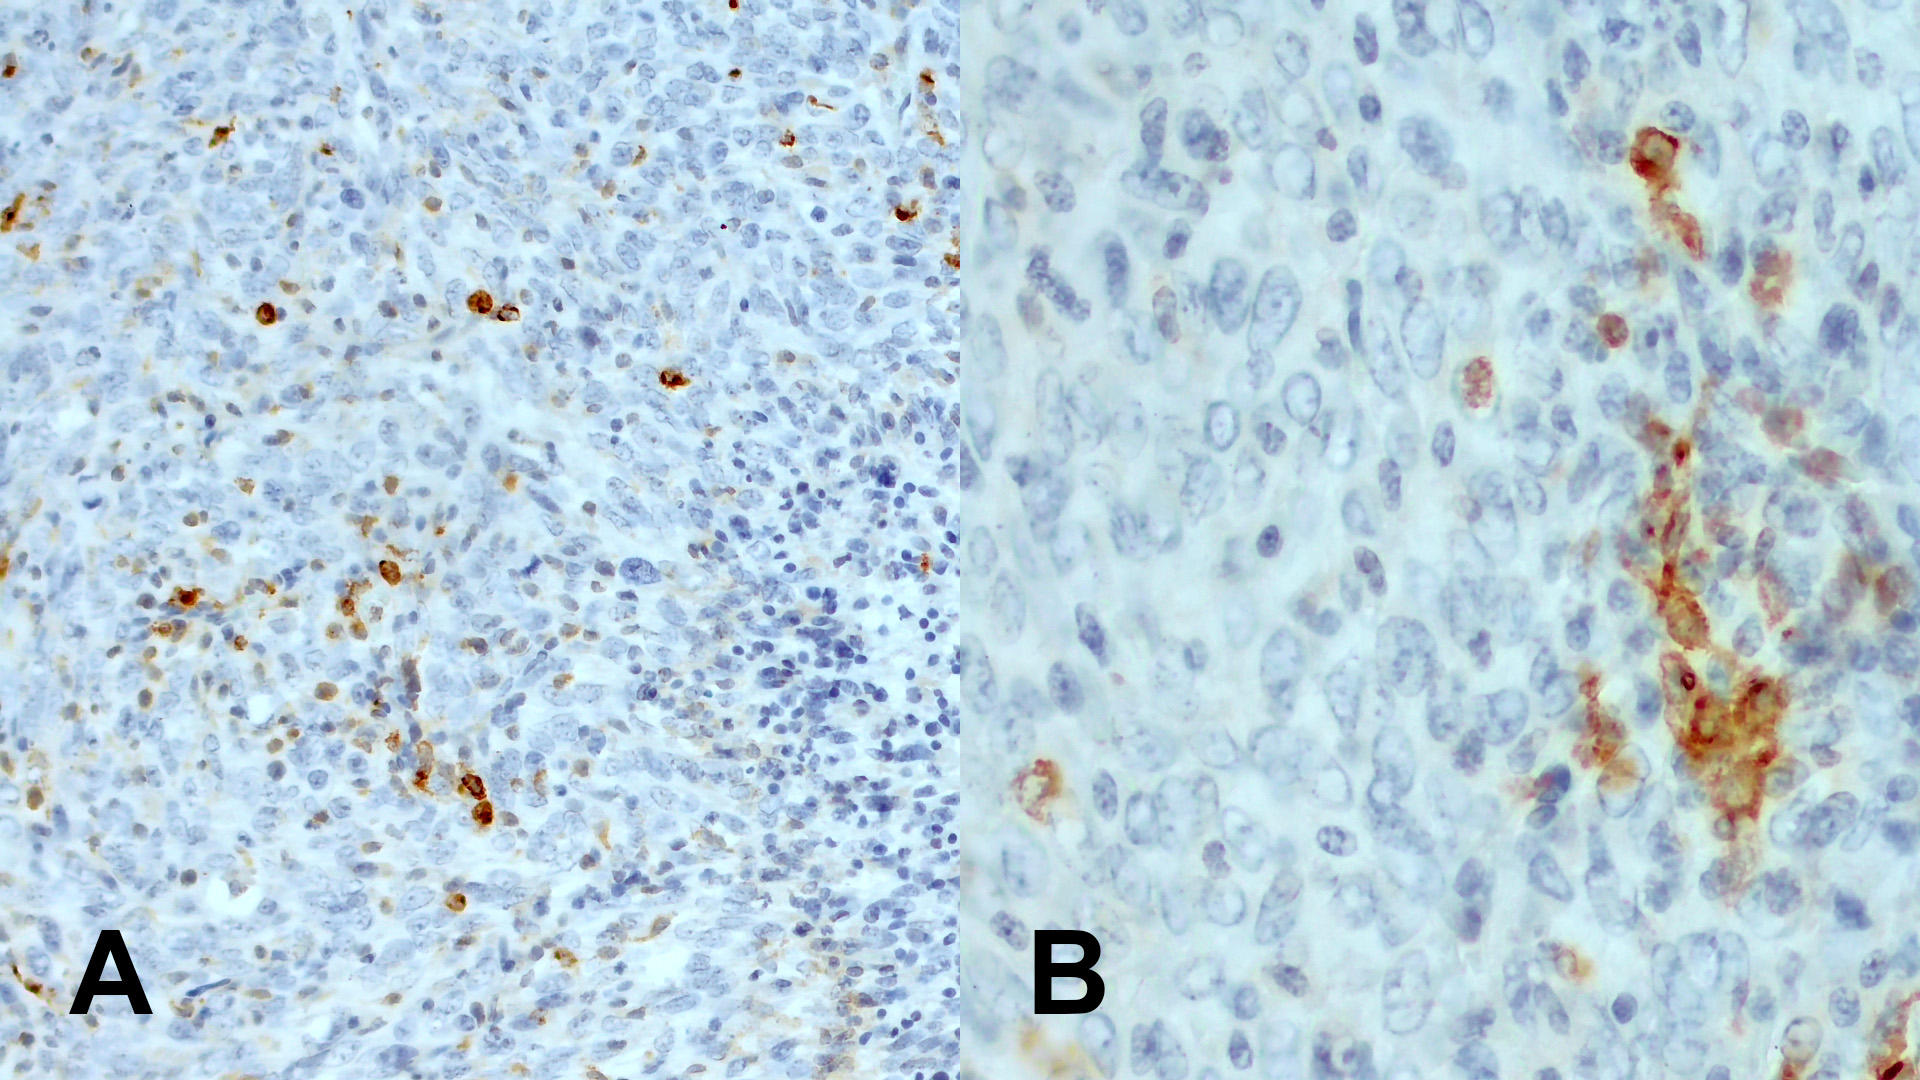 Immunohistochemical staining for CD11c in formalin-fixed paraffin embedded sections of a murine breast cancer